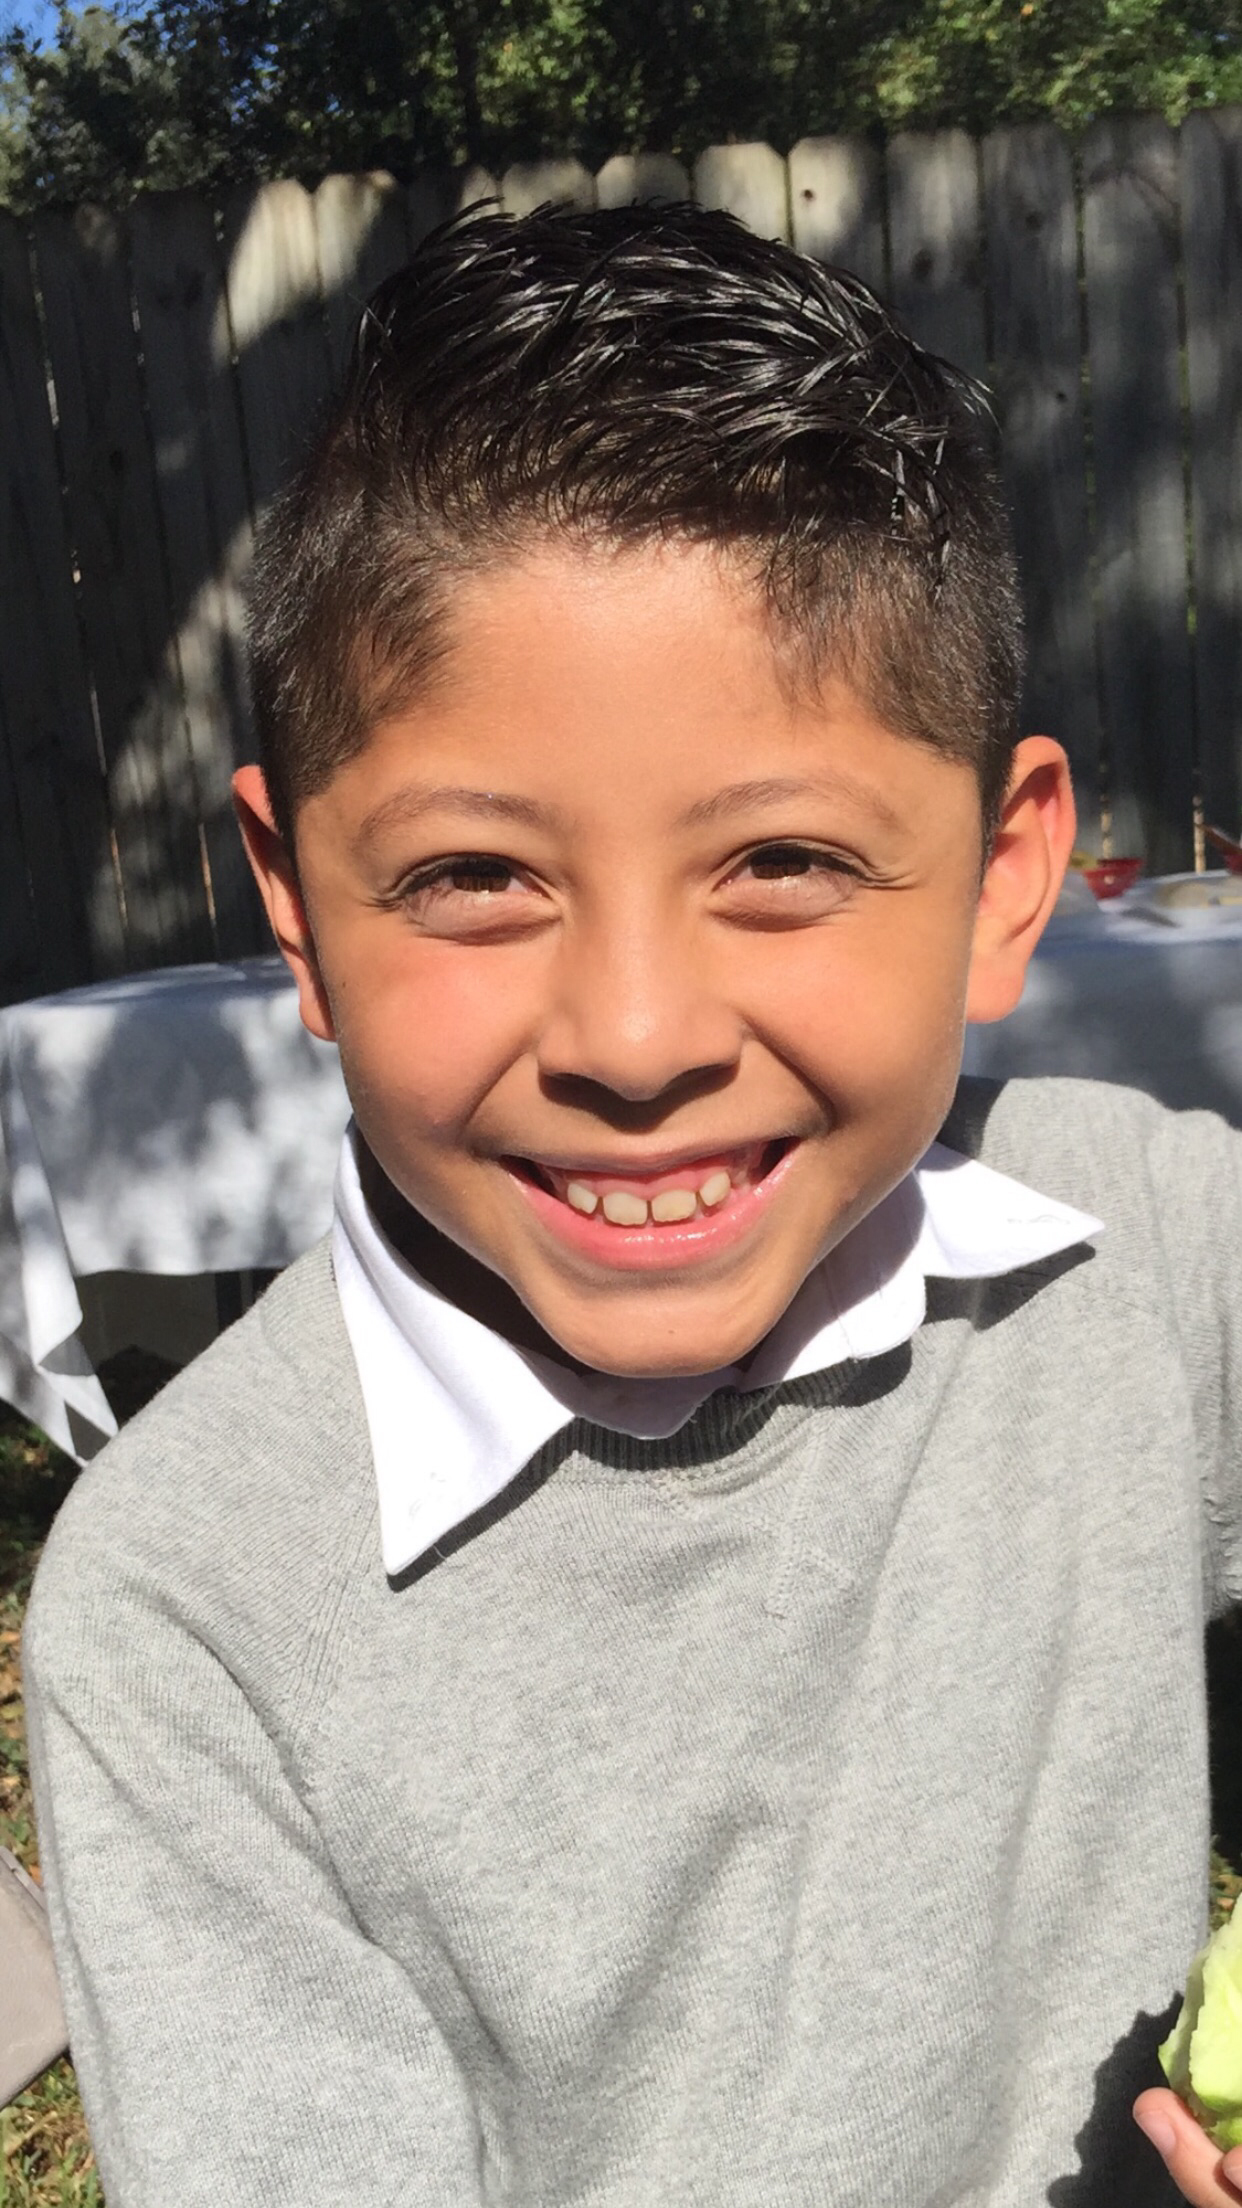 PHOTO: Seen without his special effects makeup, Jordan Alexander Penilla, 10, smiles in this undated picture photographed by his mother, Stephanie Garcia. 